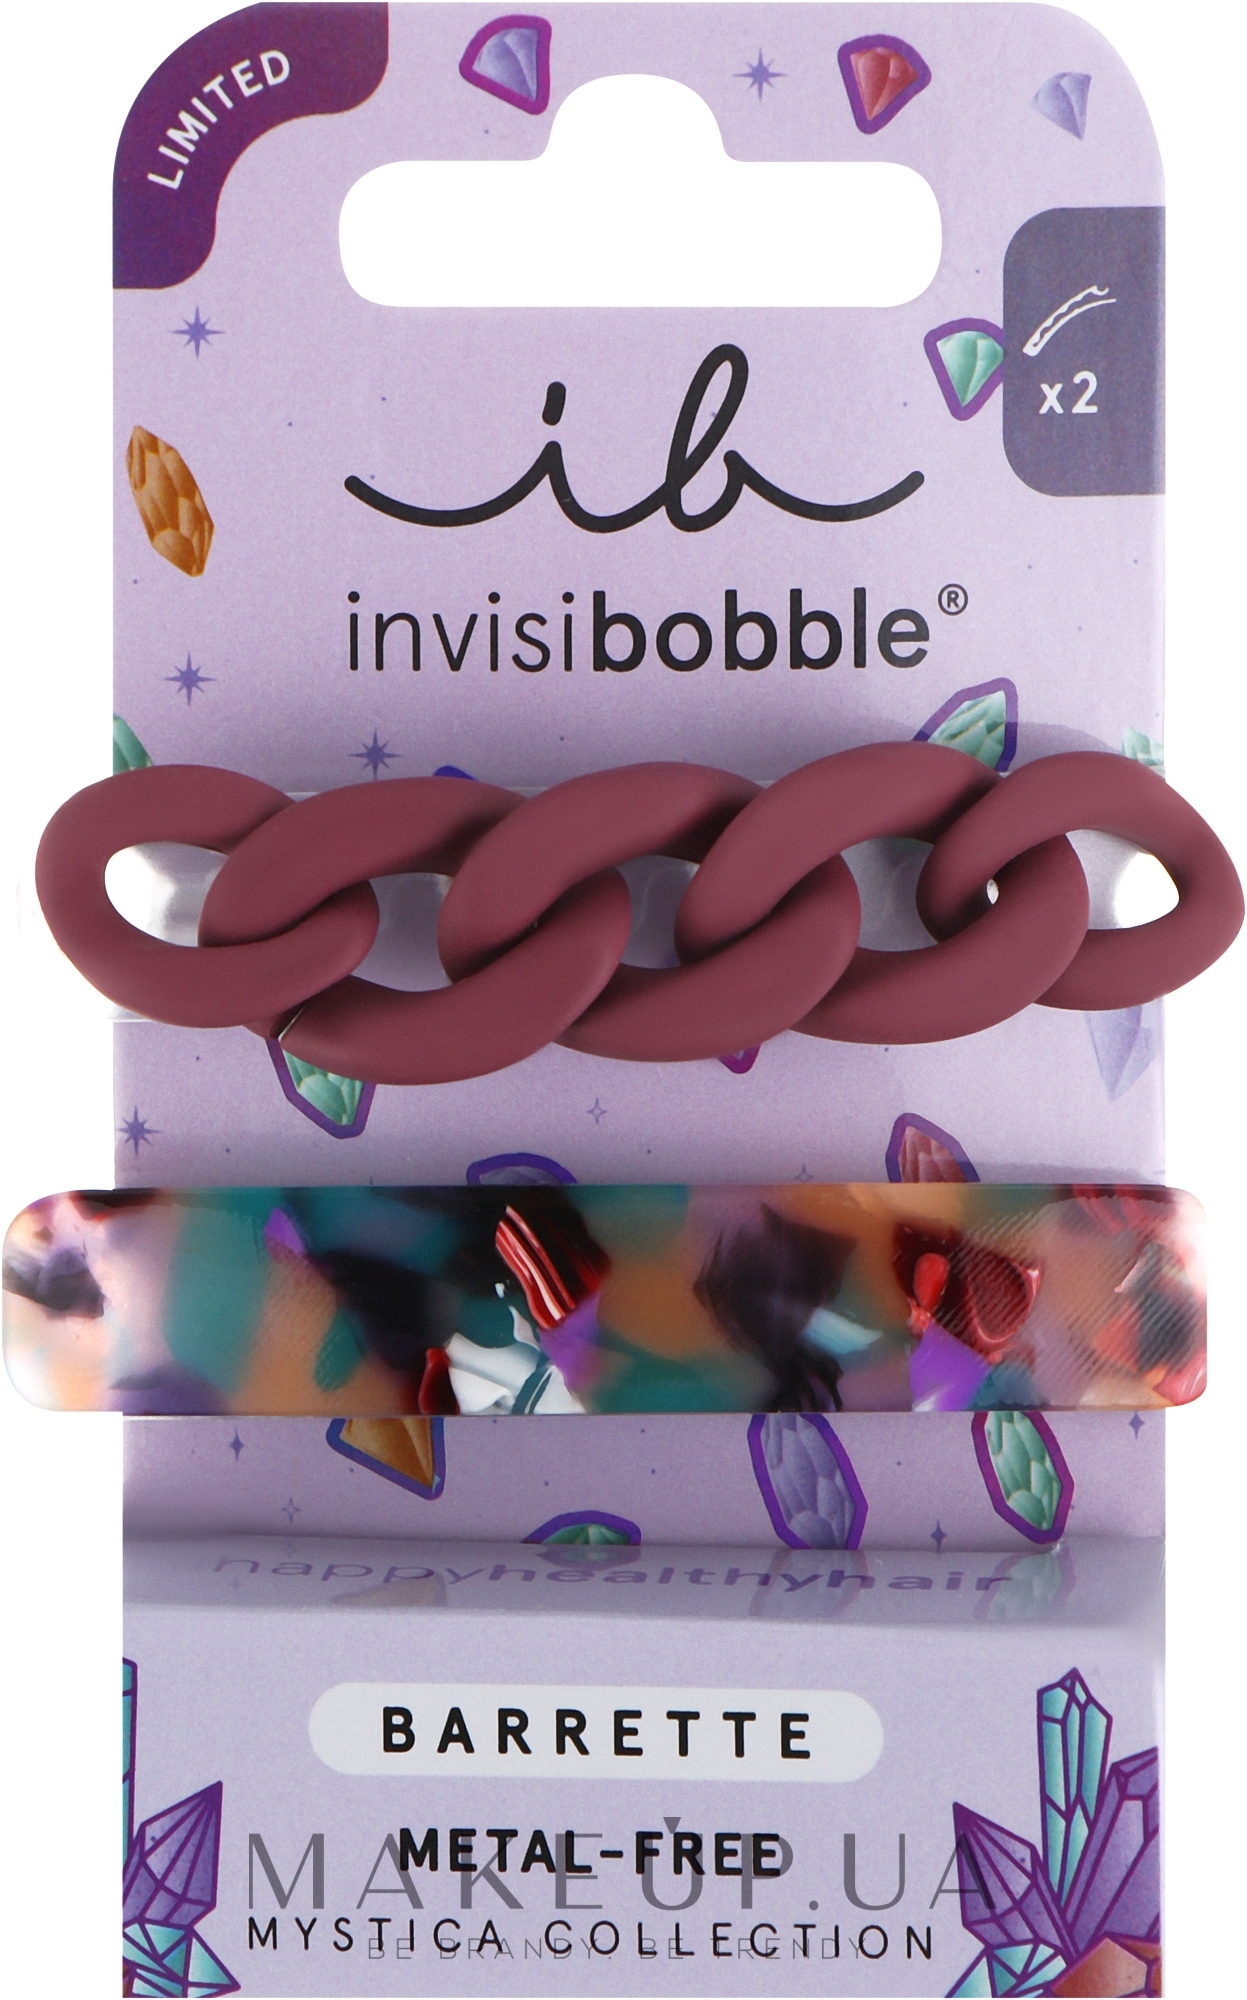 Заколка для волосся - Invisibobble Barrette Mystica The Rest Is Mystery — фото 2шт